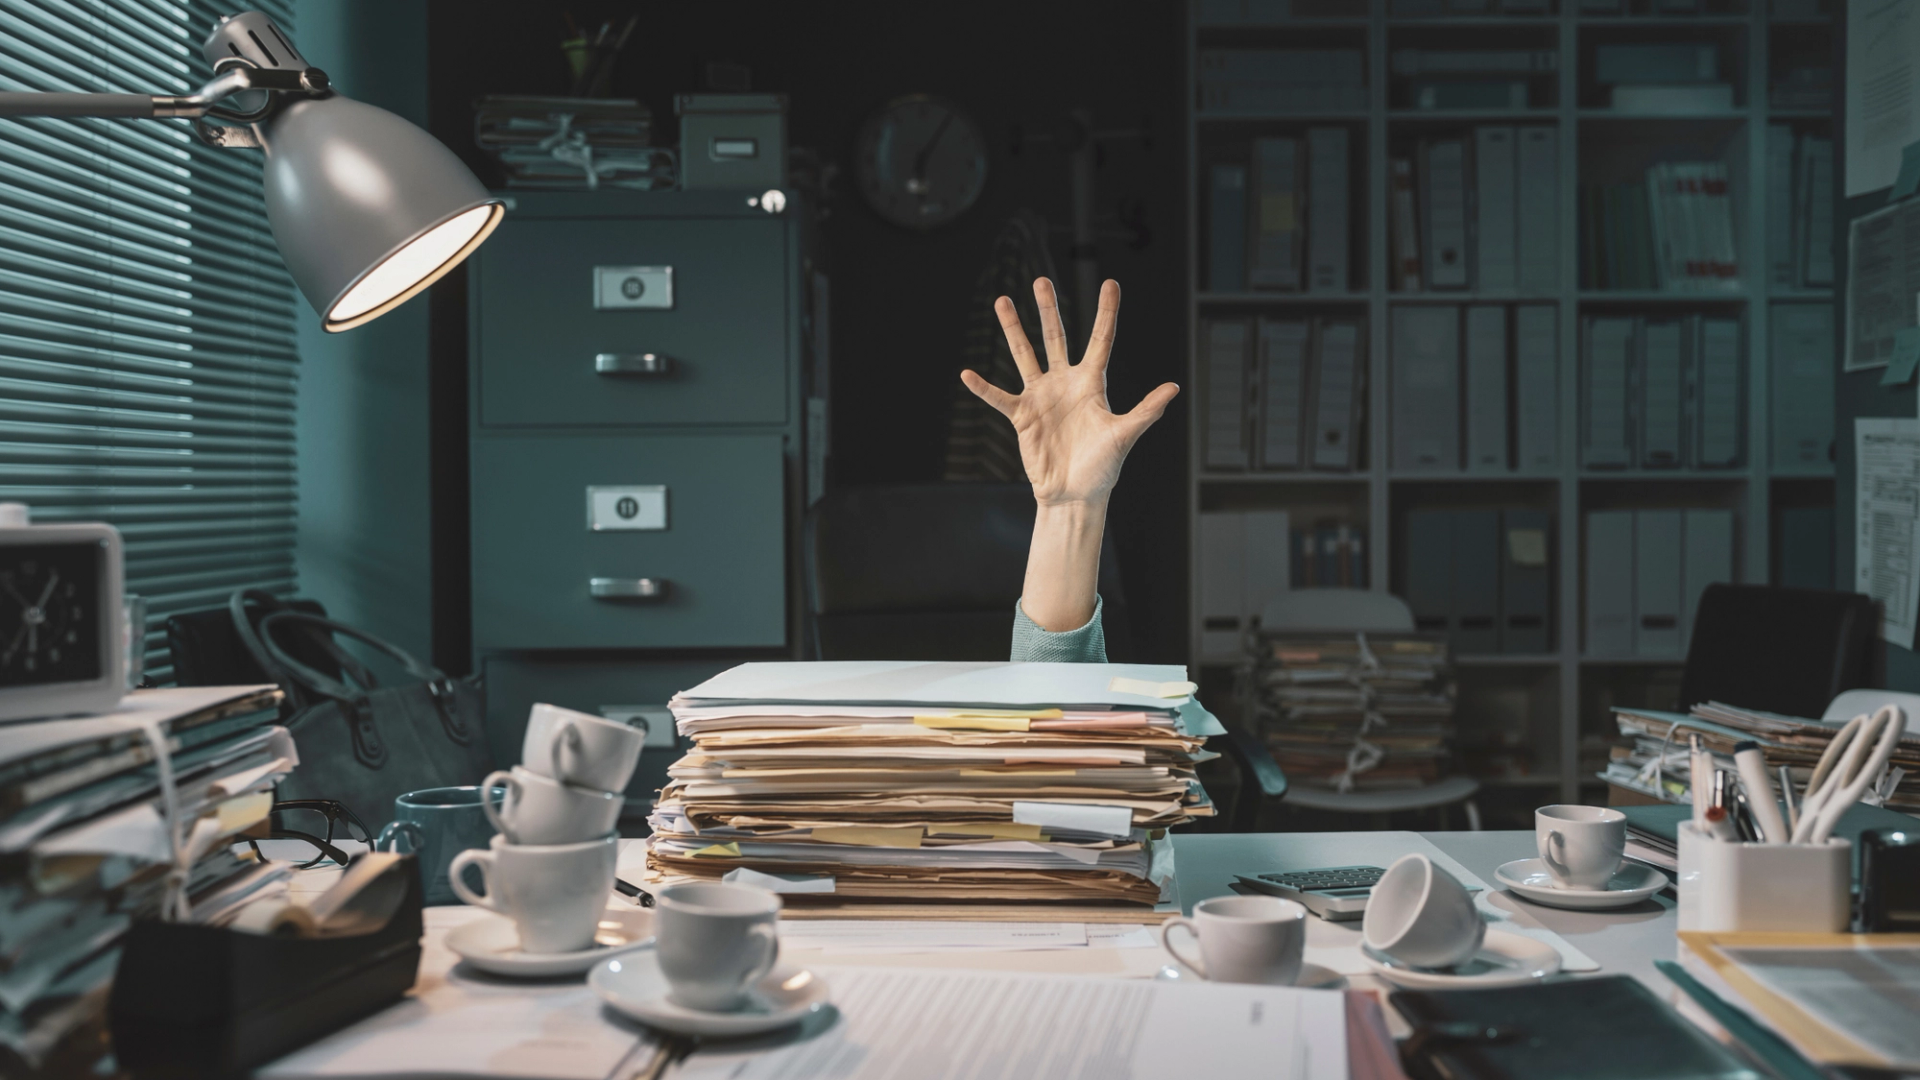 Hand asking for help on a desk full of papers and coffee cups